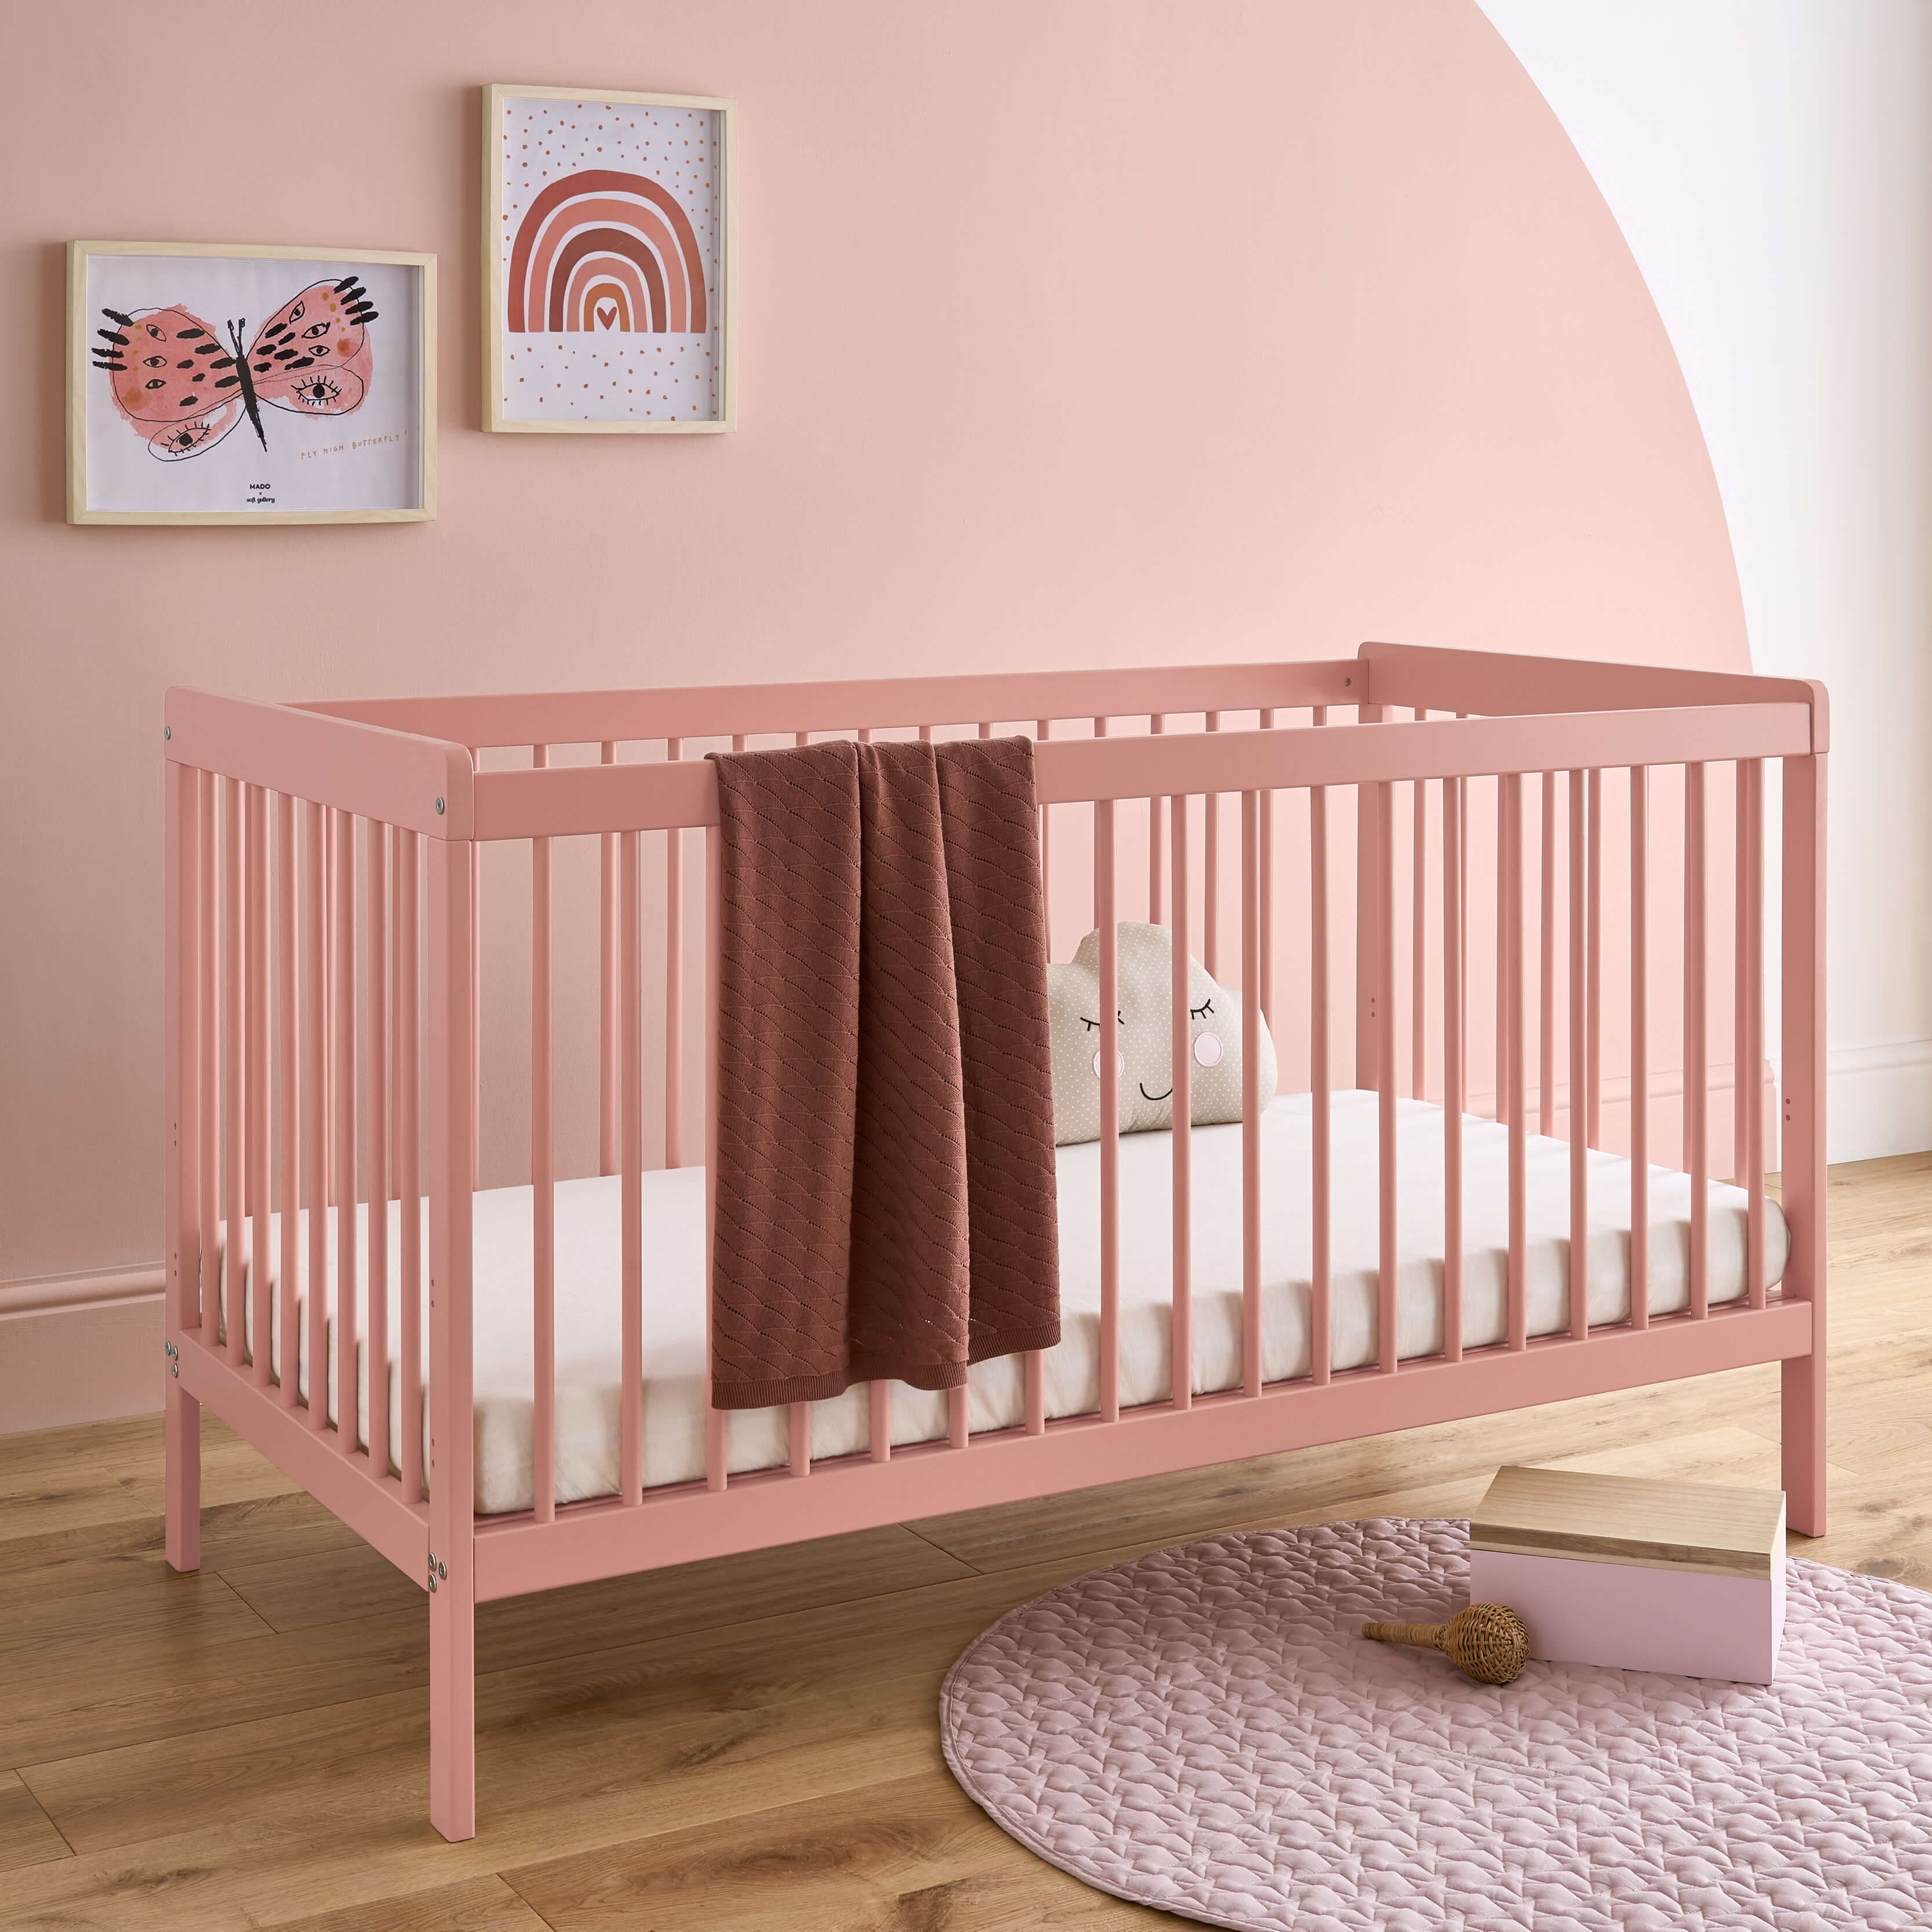 Cuddleco Nola 2 Piece Nursery Furniture Set - Blush Pink -  | For Your Little One